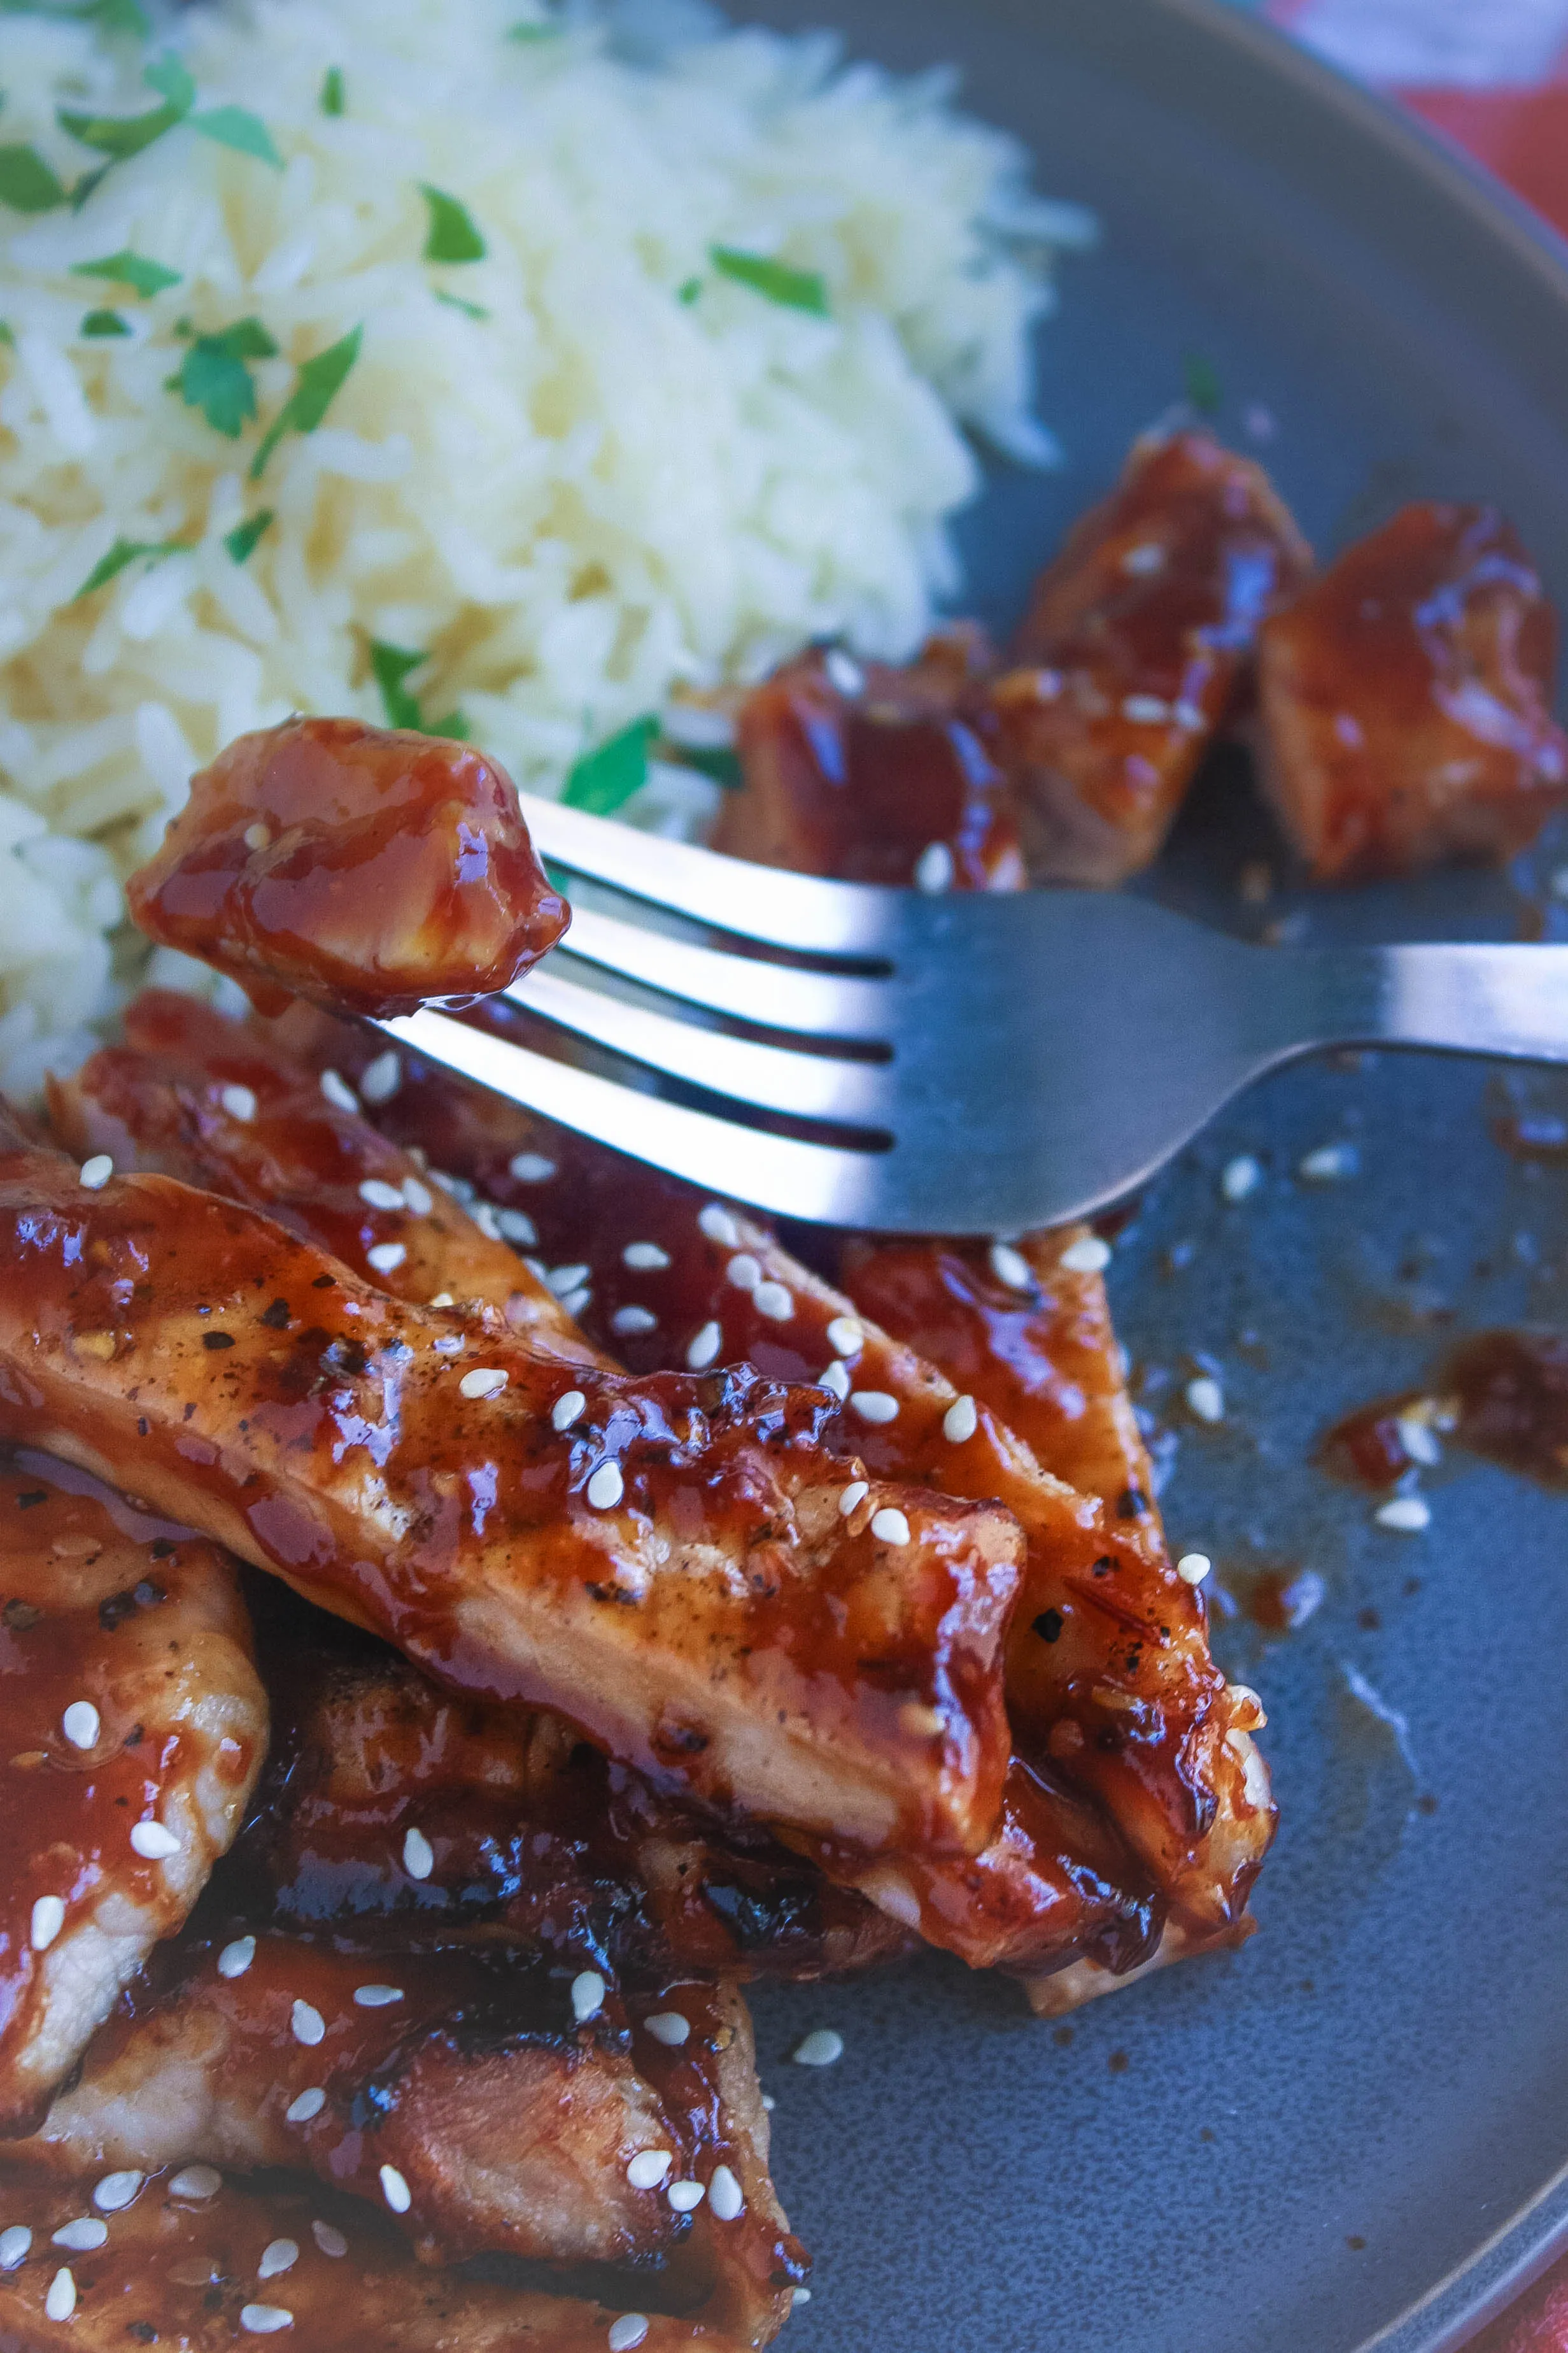 Grilled Boneless Pork Chops with Korean-Style BBQ Sauce is the perfect and tasty main dish meal. Grilled Boneless Pork Chops with Korean-Style BBQ Sauce is what you need after a busy day!